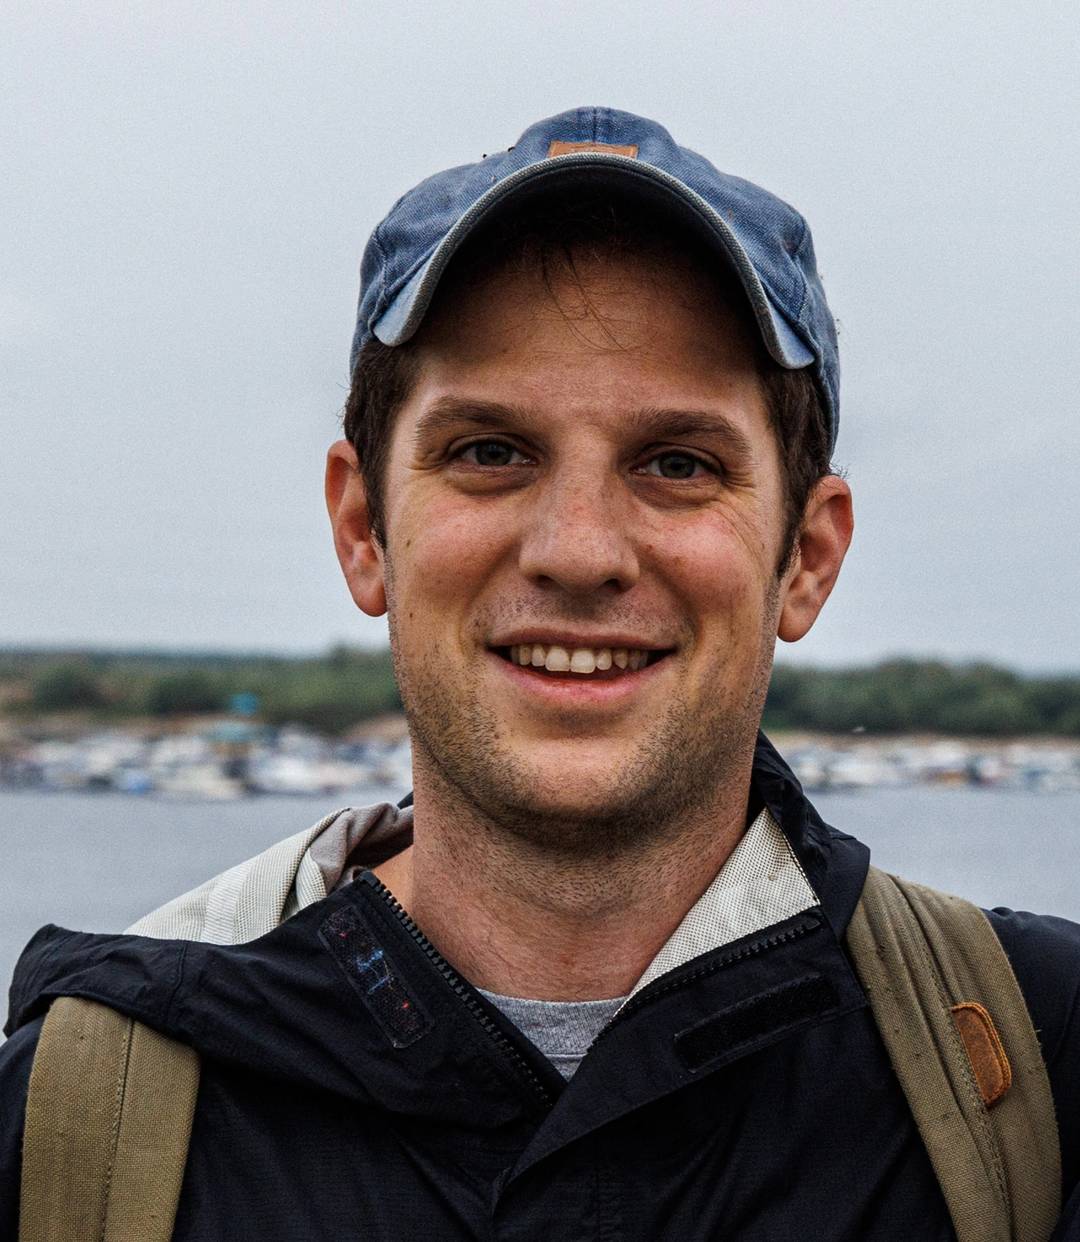 A July 2021 photo of American journalist Evan Gershkovich. Gershkovich was detained by Russian authorities on April 6 and charged with espionage the following day.